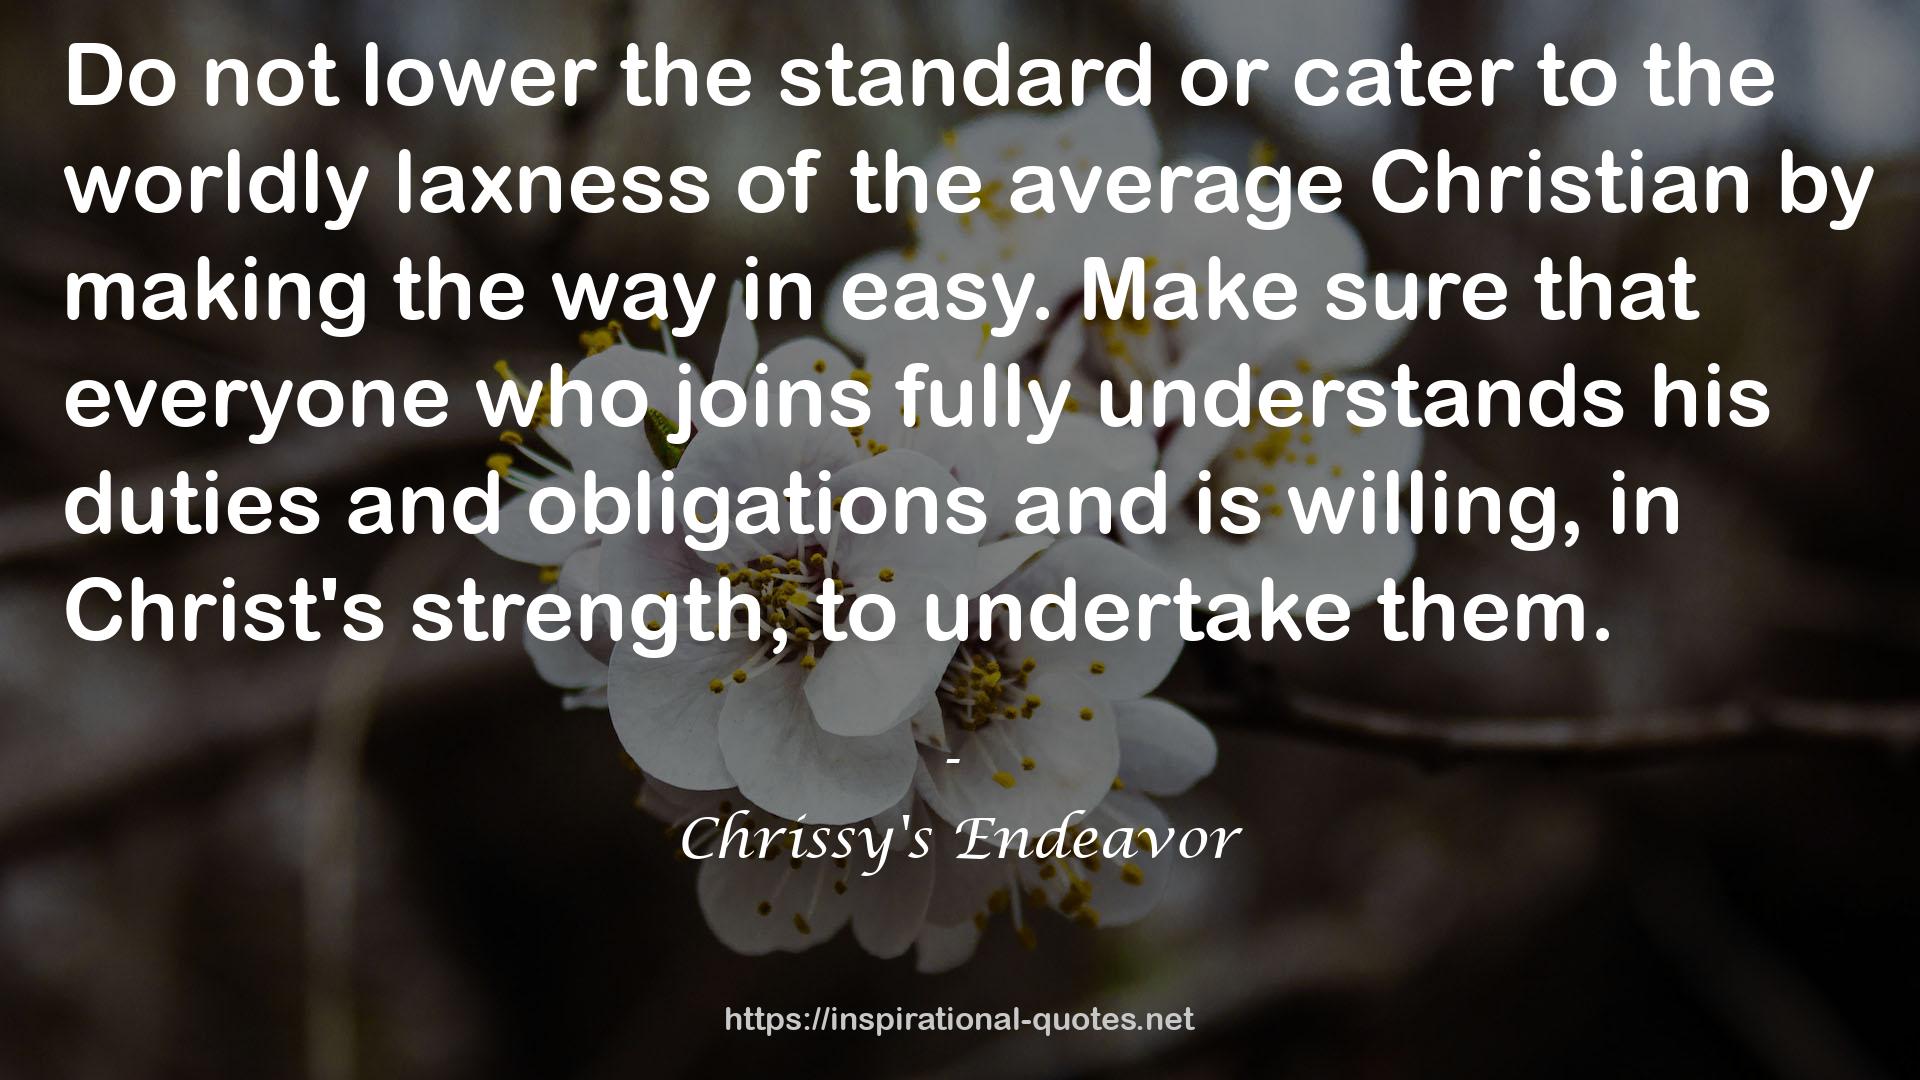 Chrissy's Endeavor QUOTES